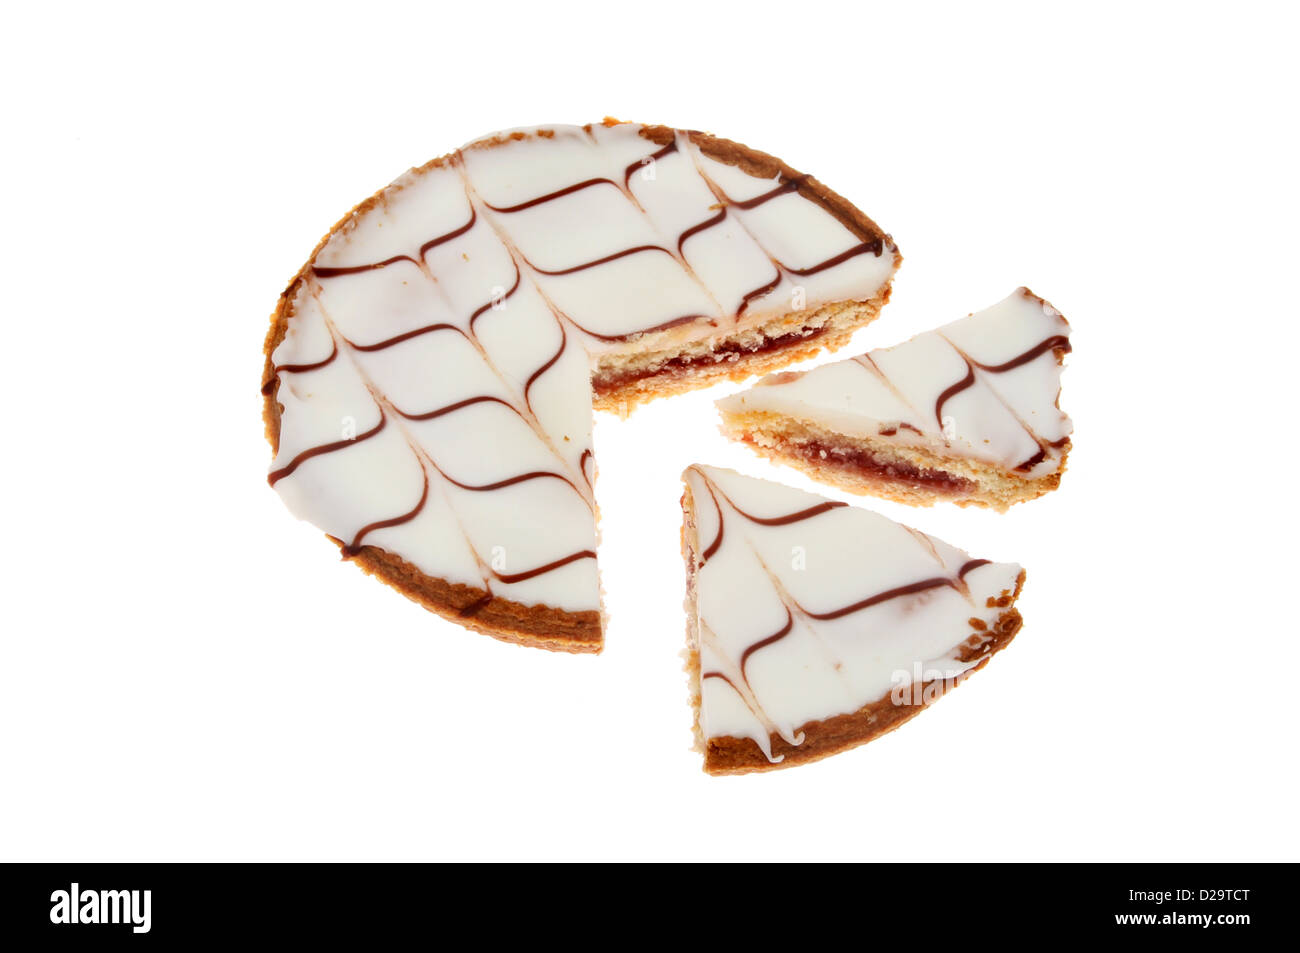 Bakewell tart with two slices cut out to illustrate a pie chart Stock Photo